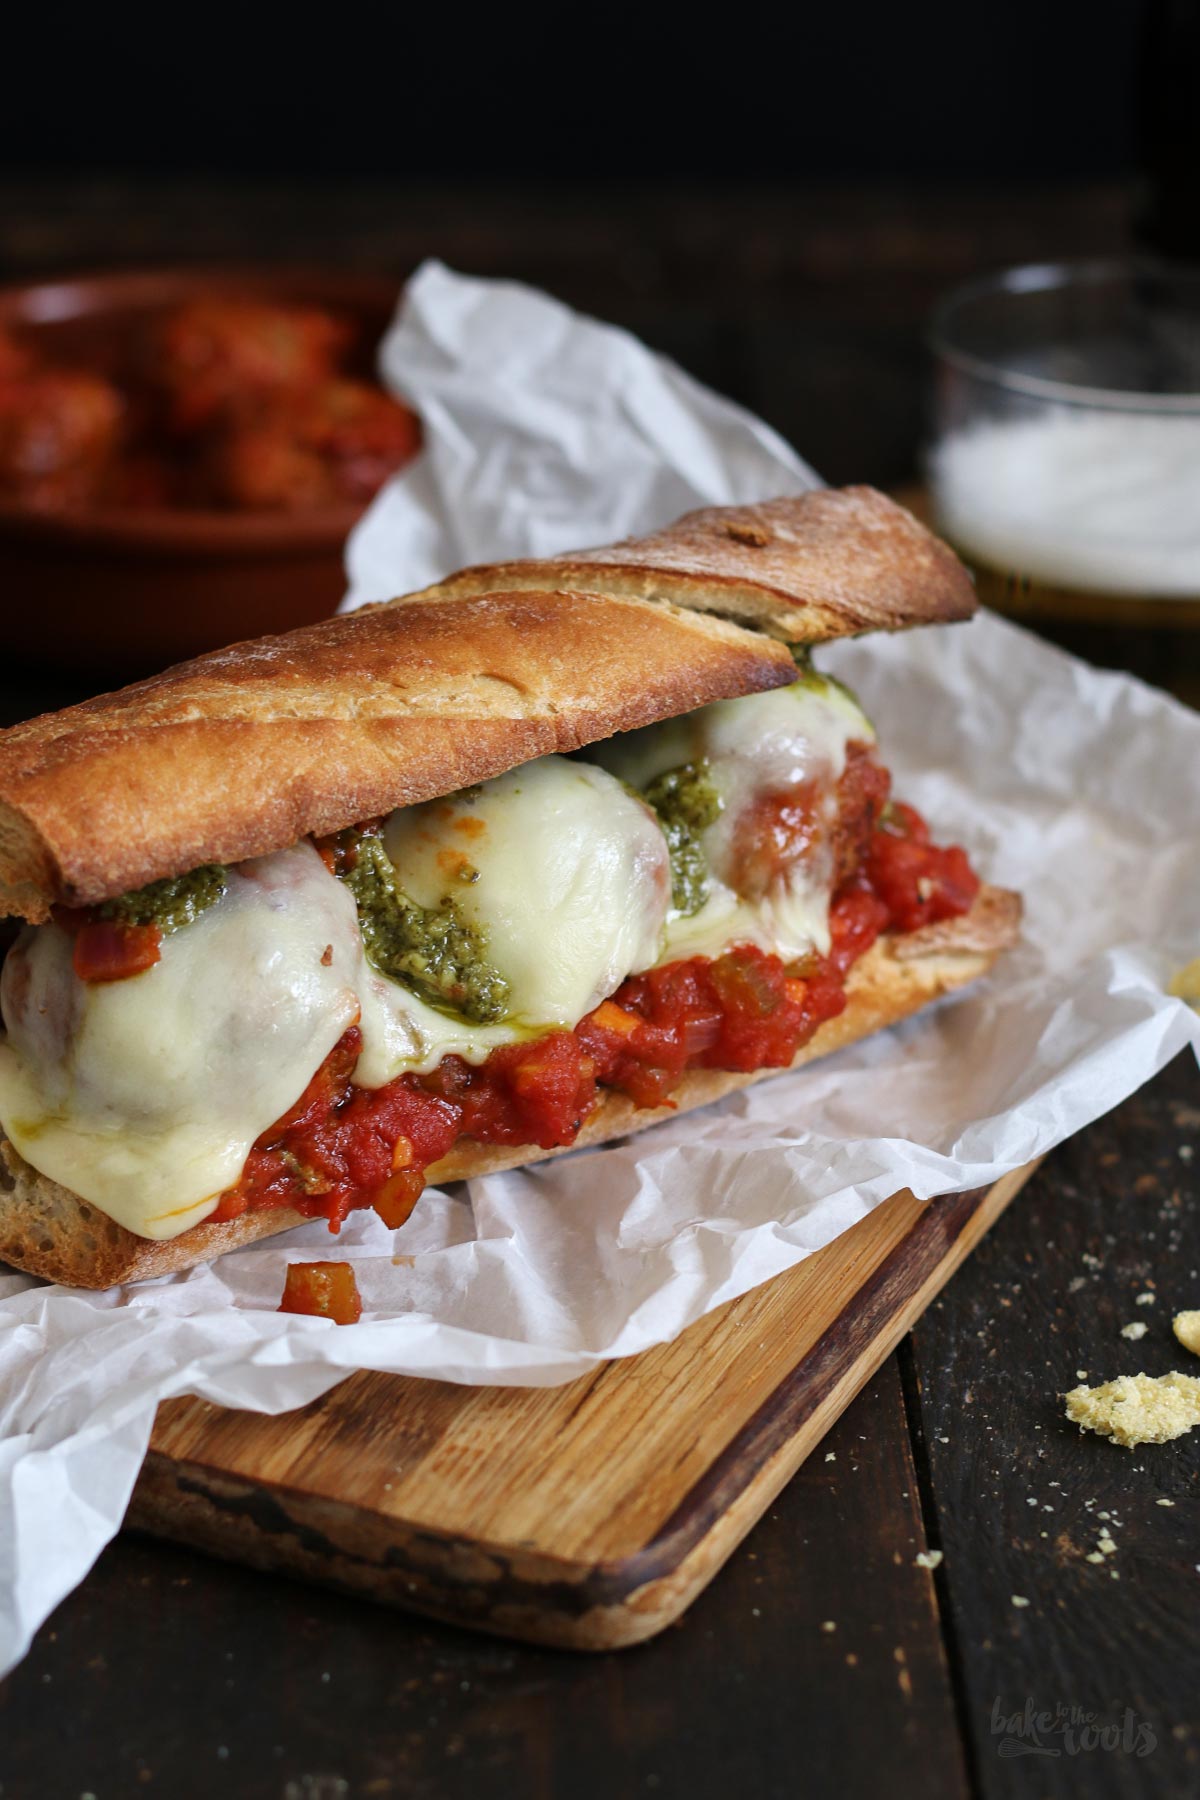 Meatball Sandwiches (Subs) mit Tomatensoße und Pesto | Bake to the roots